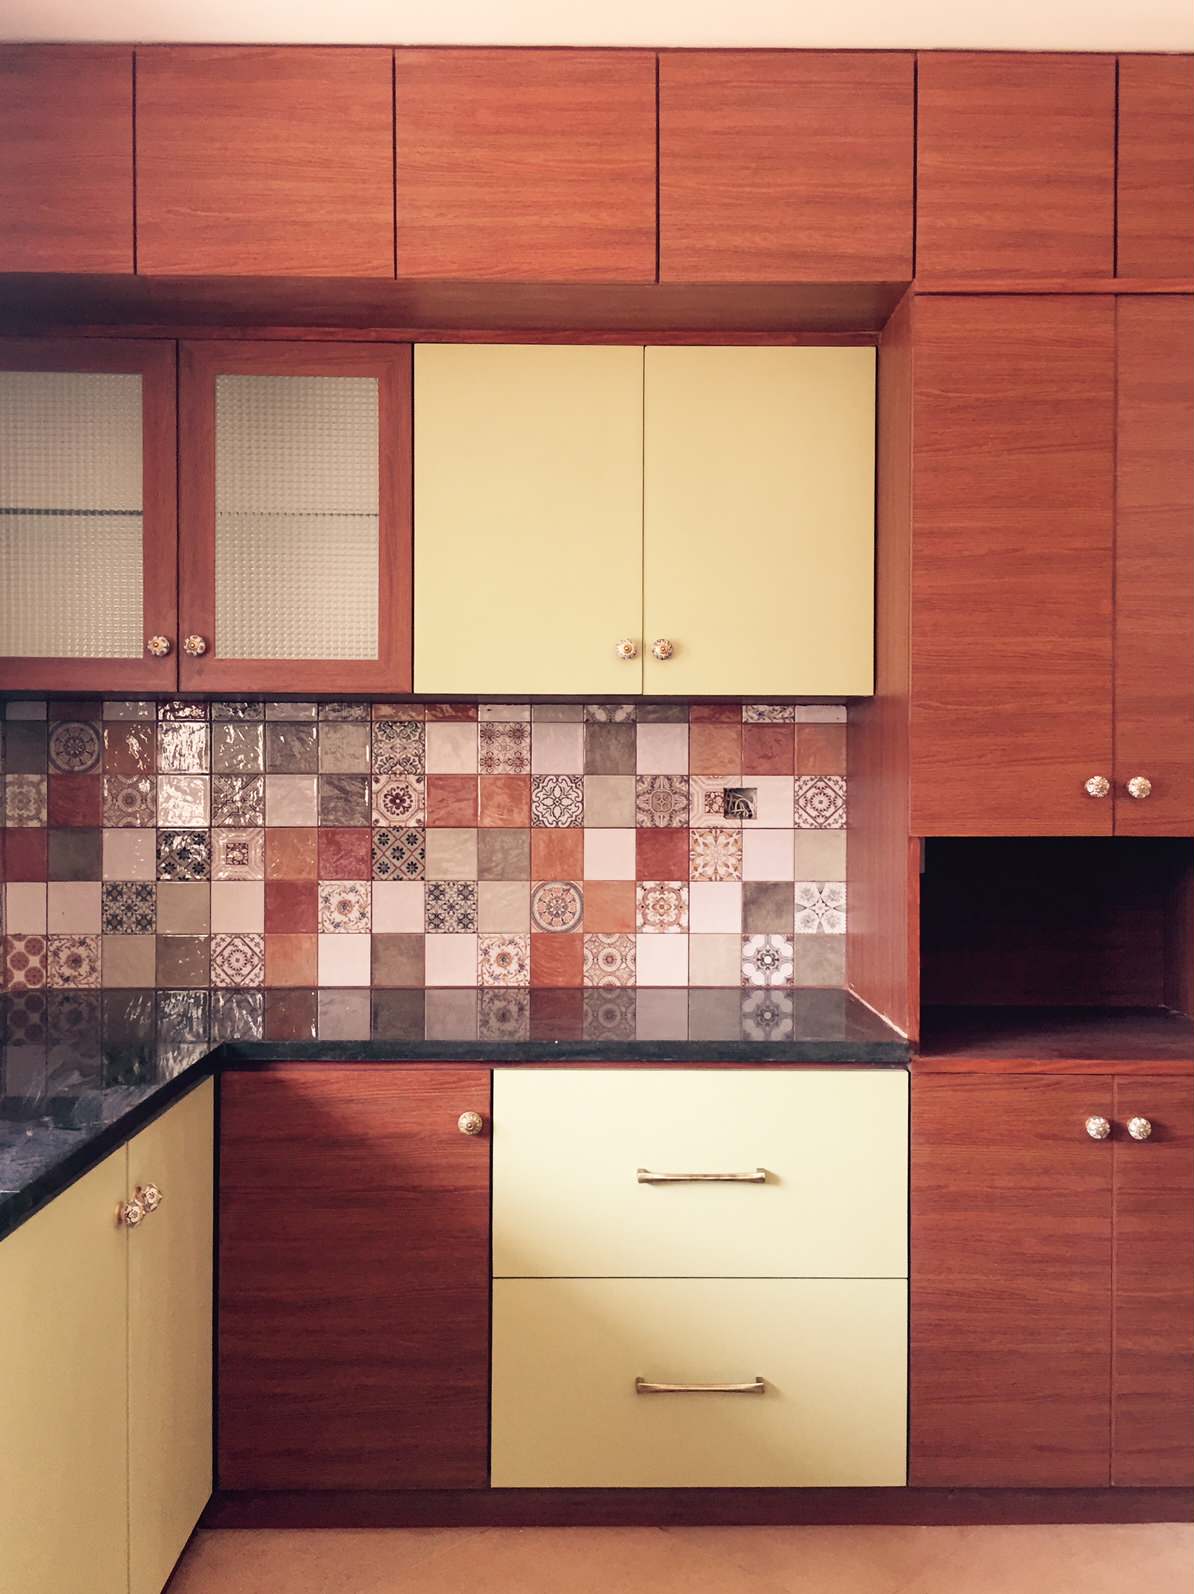 Extensive Assortment of Incredible 4K Kitchen Tile Designs: Over 999 Images from India